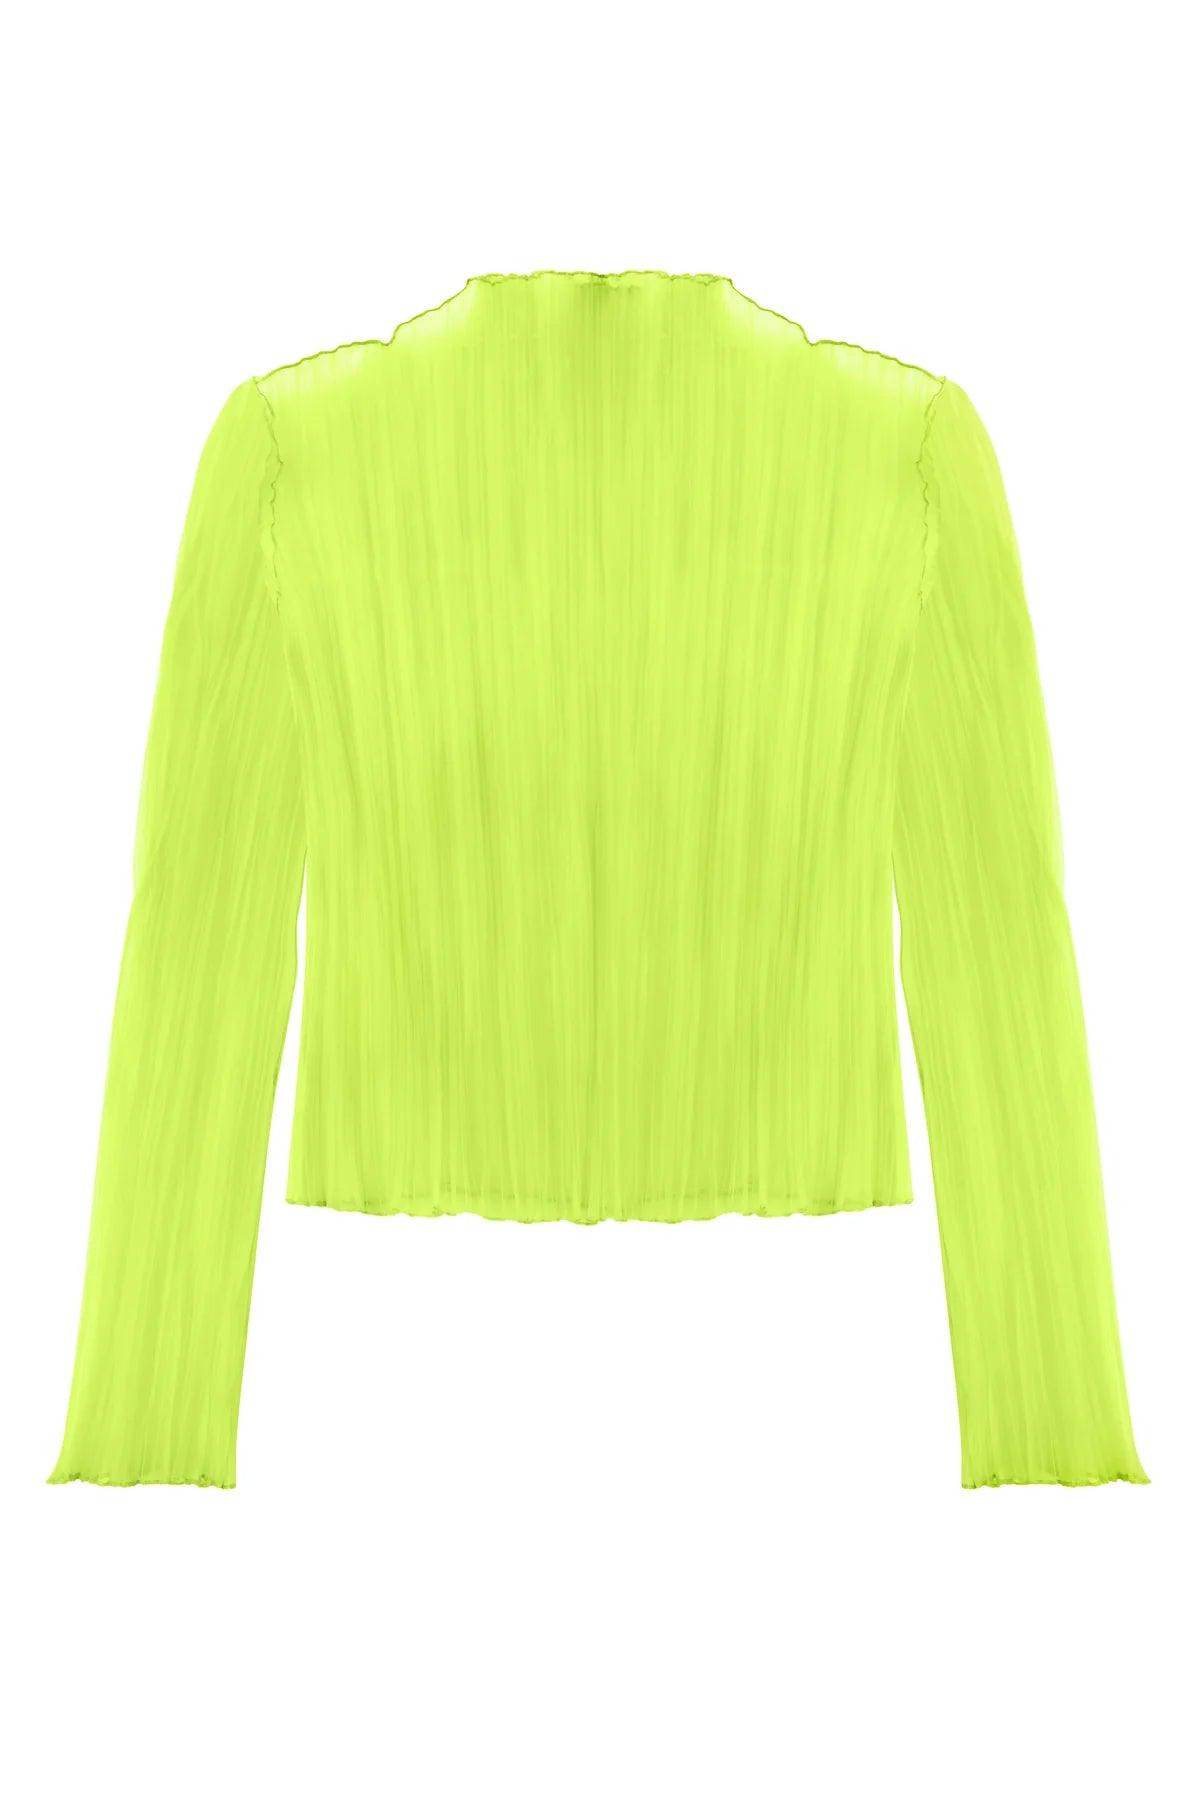 Pleated Neon Top